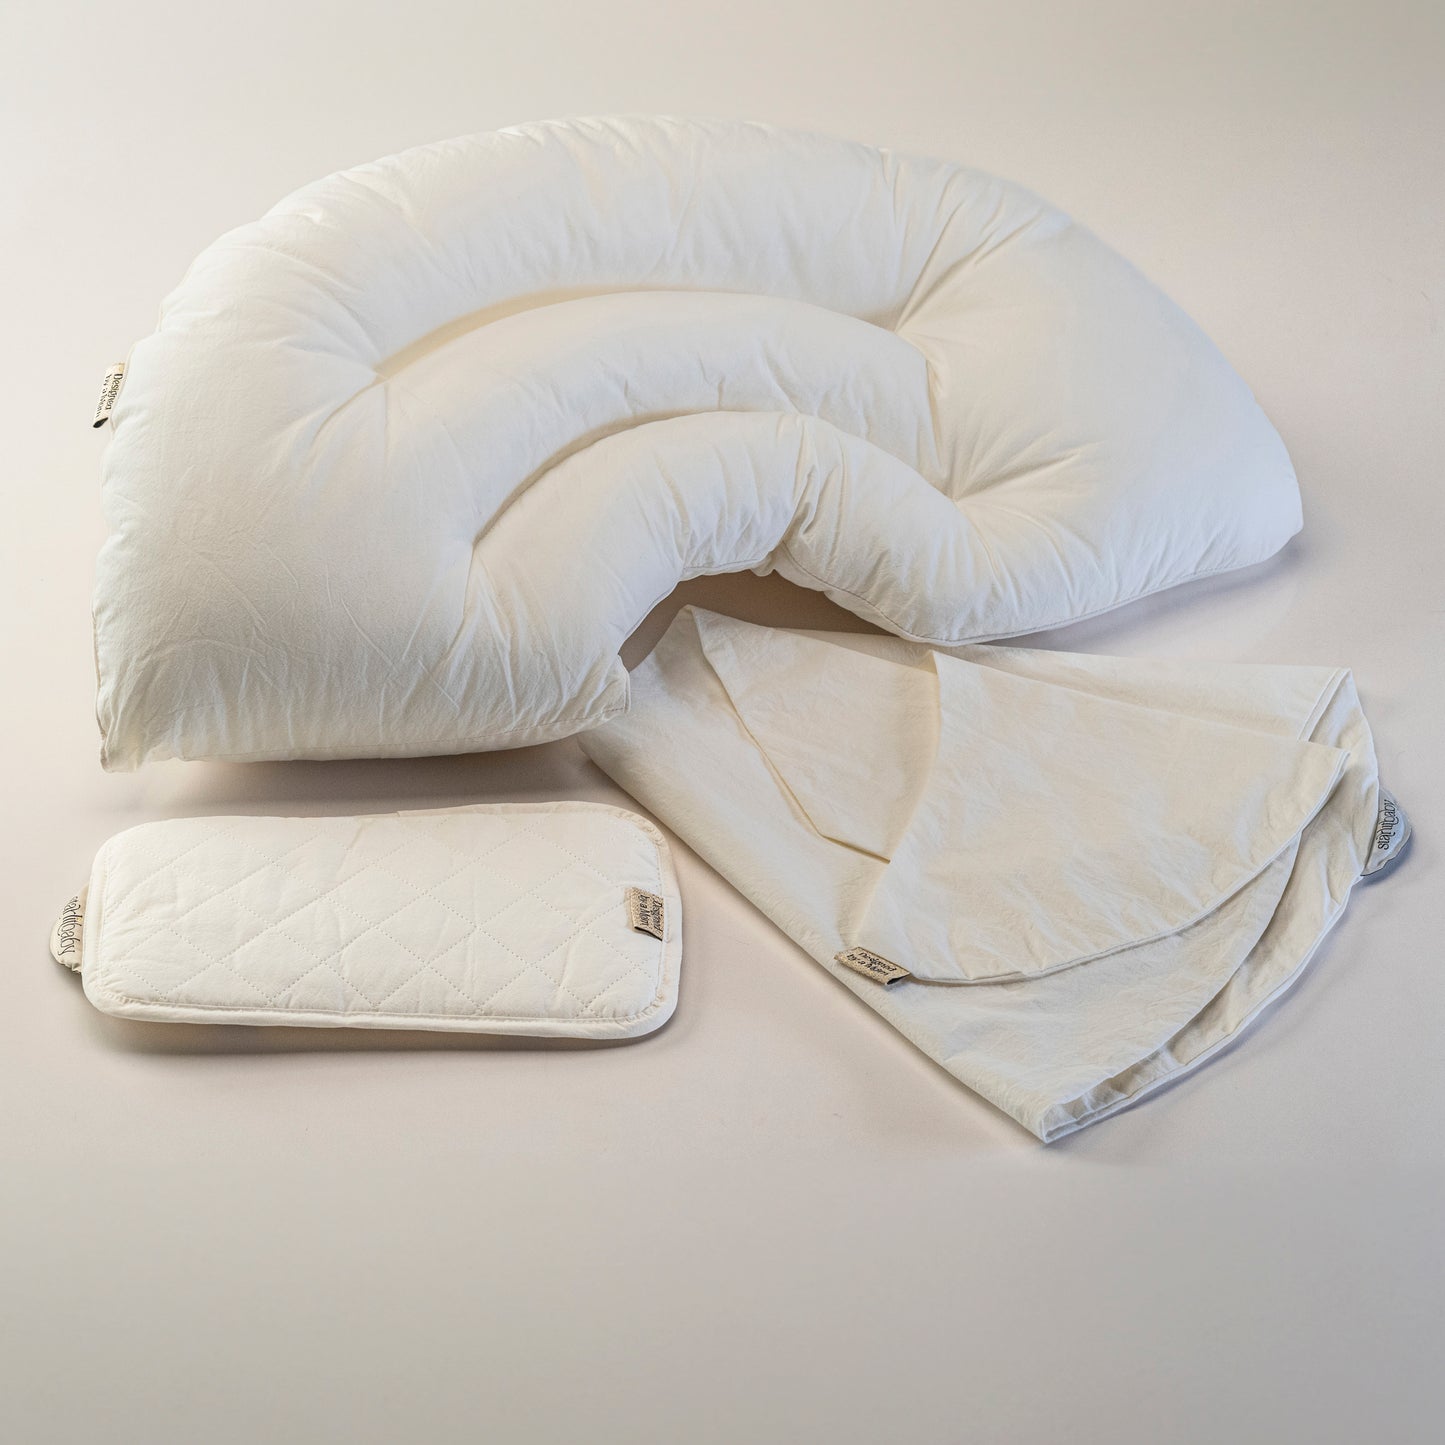 LACTANCE CUSHIONIdeal for moms with cesarean section!